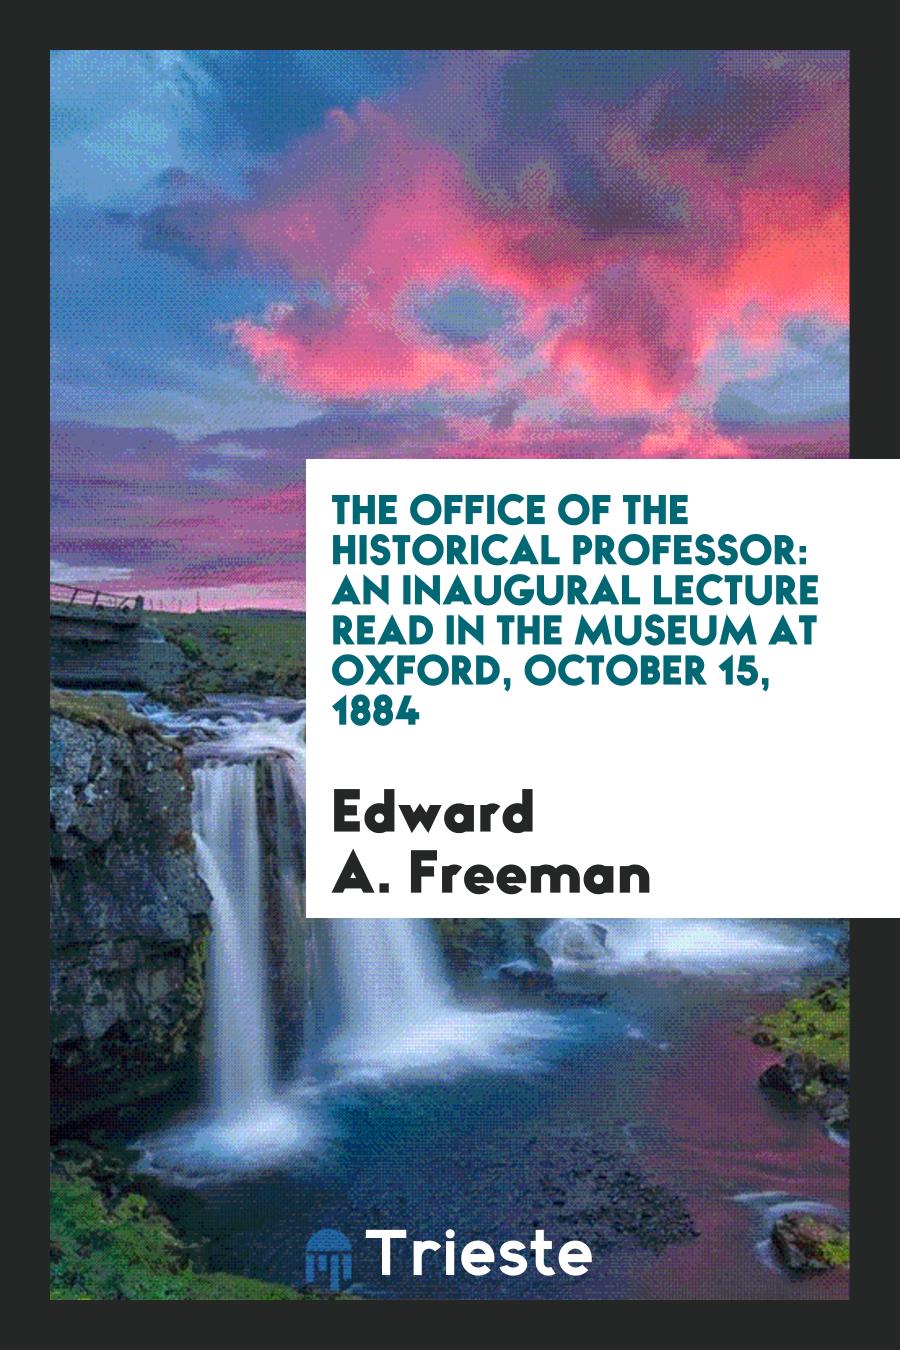 The Office of the Historical Professor: An Inaugural Lecture Read in the Museum at Oxford, October 15, 1884